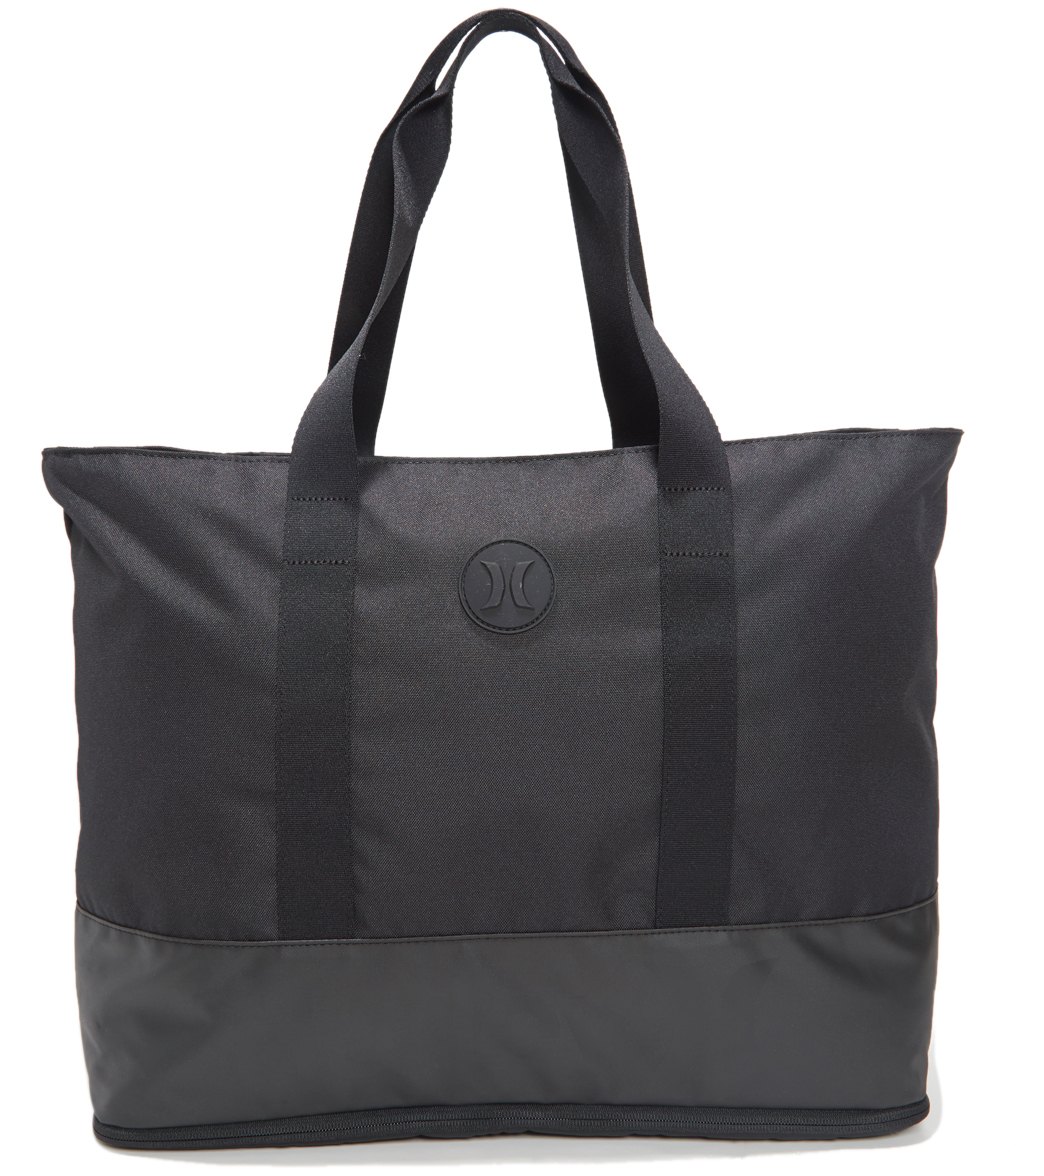 Hurley Women's Hurley Rise Beach Tote at SwimOutlet.com - Free Shipping